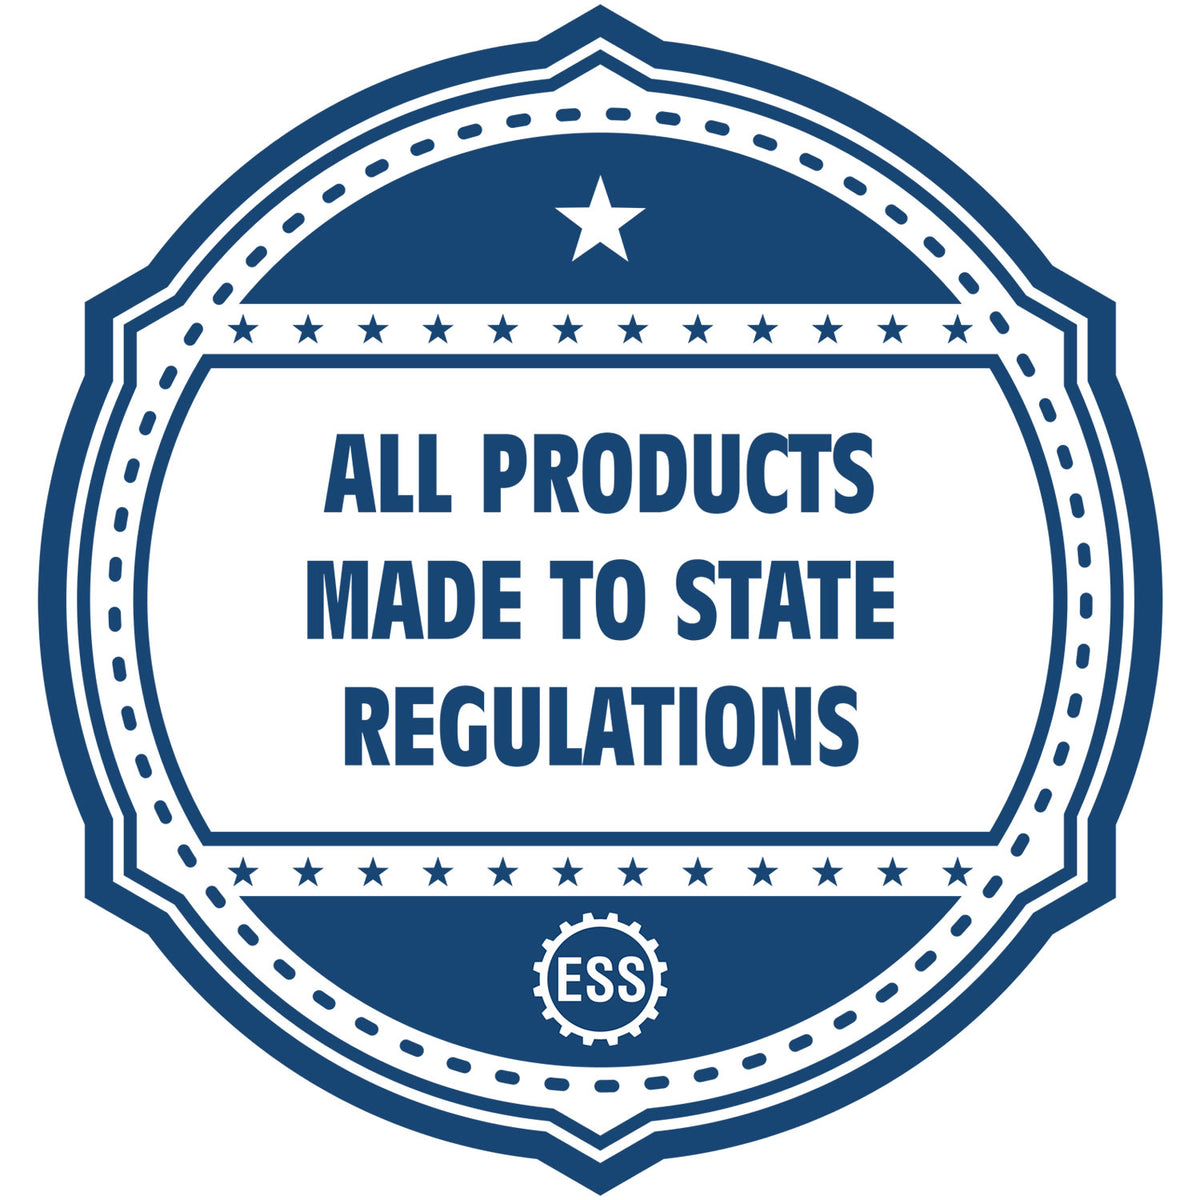 An icon or badge element for the Soft Alaska Professional Engineer Seal showing that this product is made in compliance with state regulations.